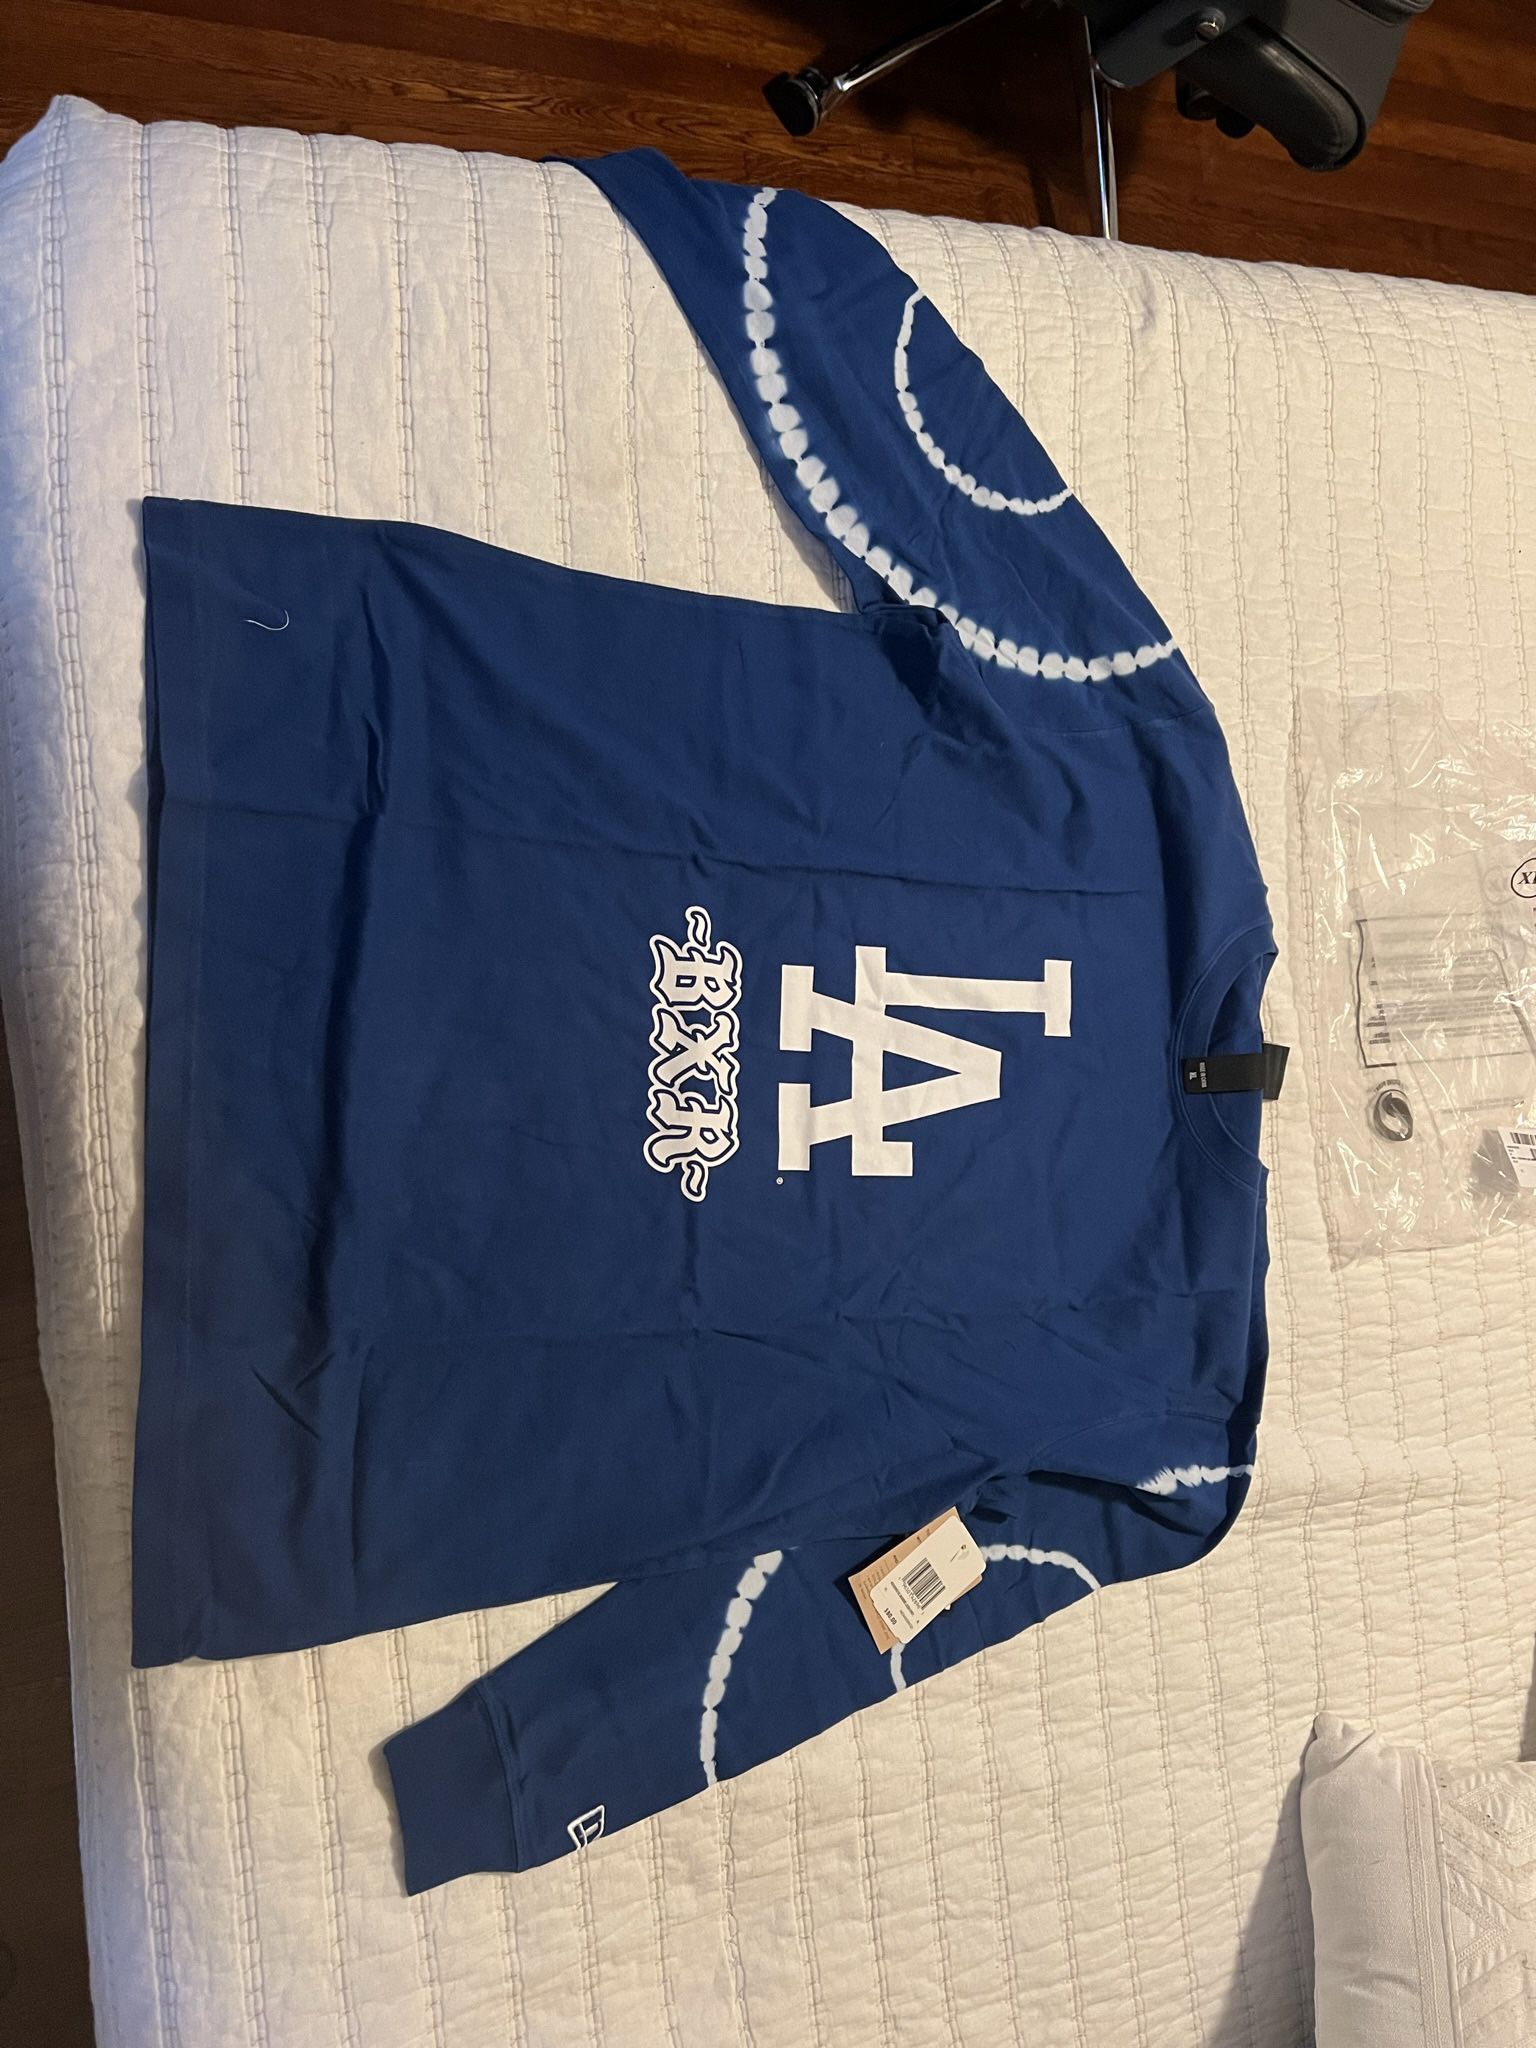 Born X Raised Dodgers Long Sleeve T-shirt for Sale in Downey, CA - OfferUp